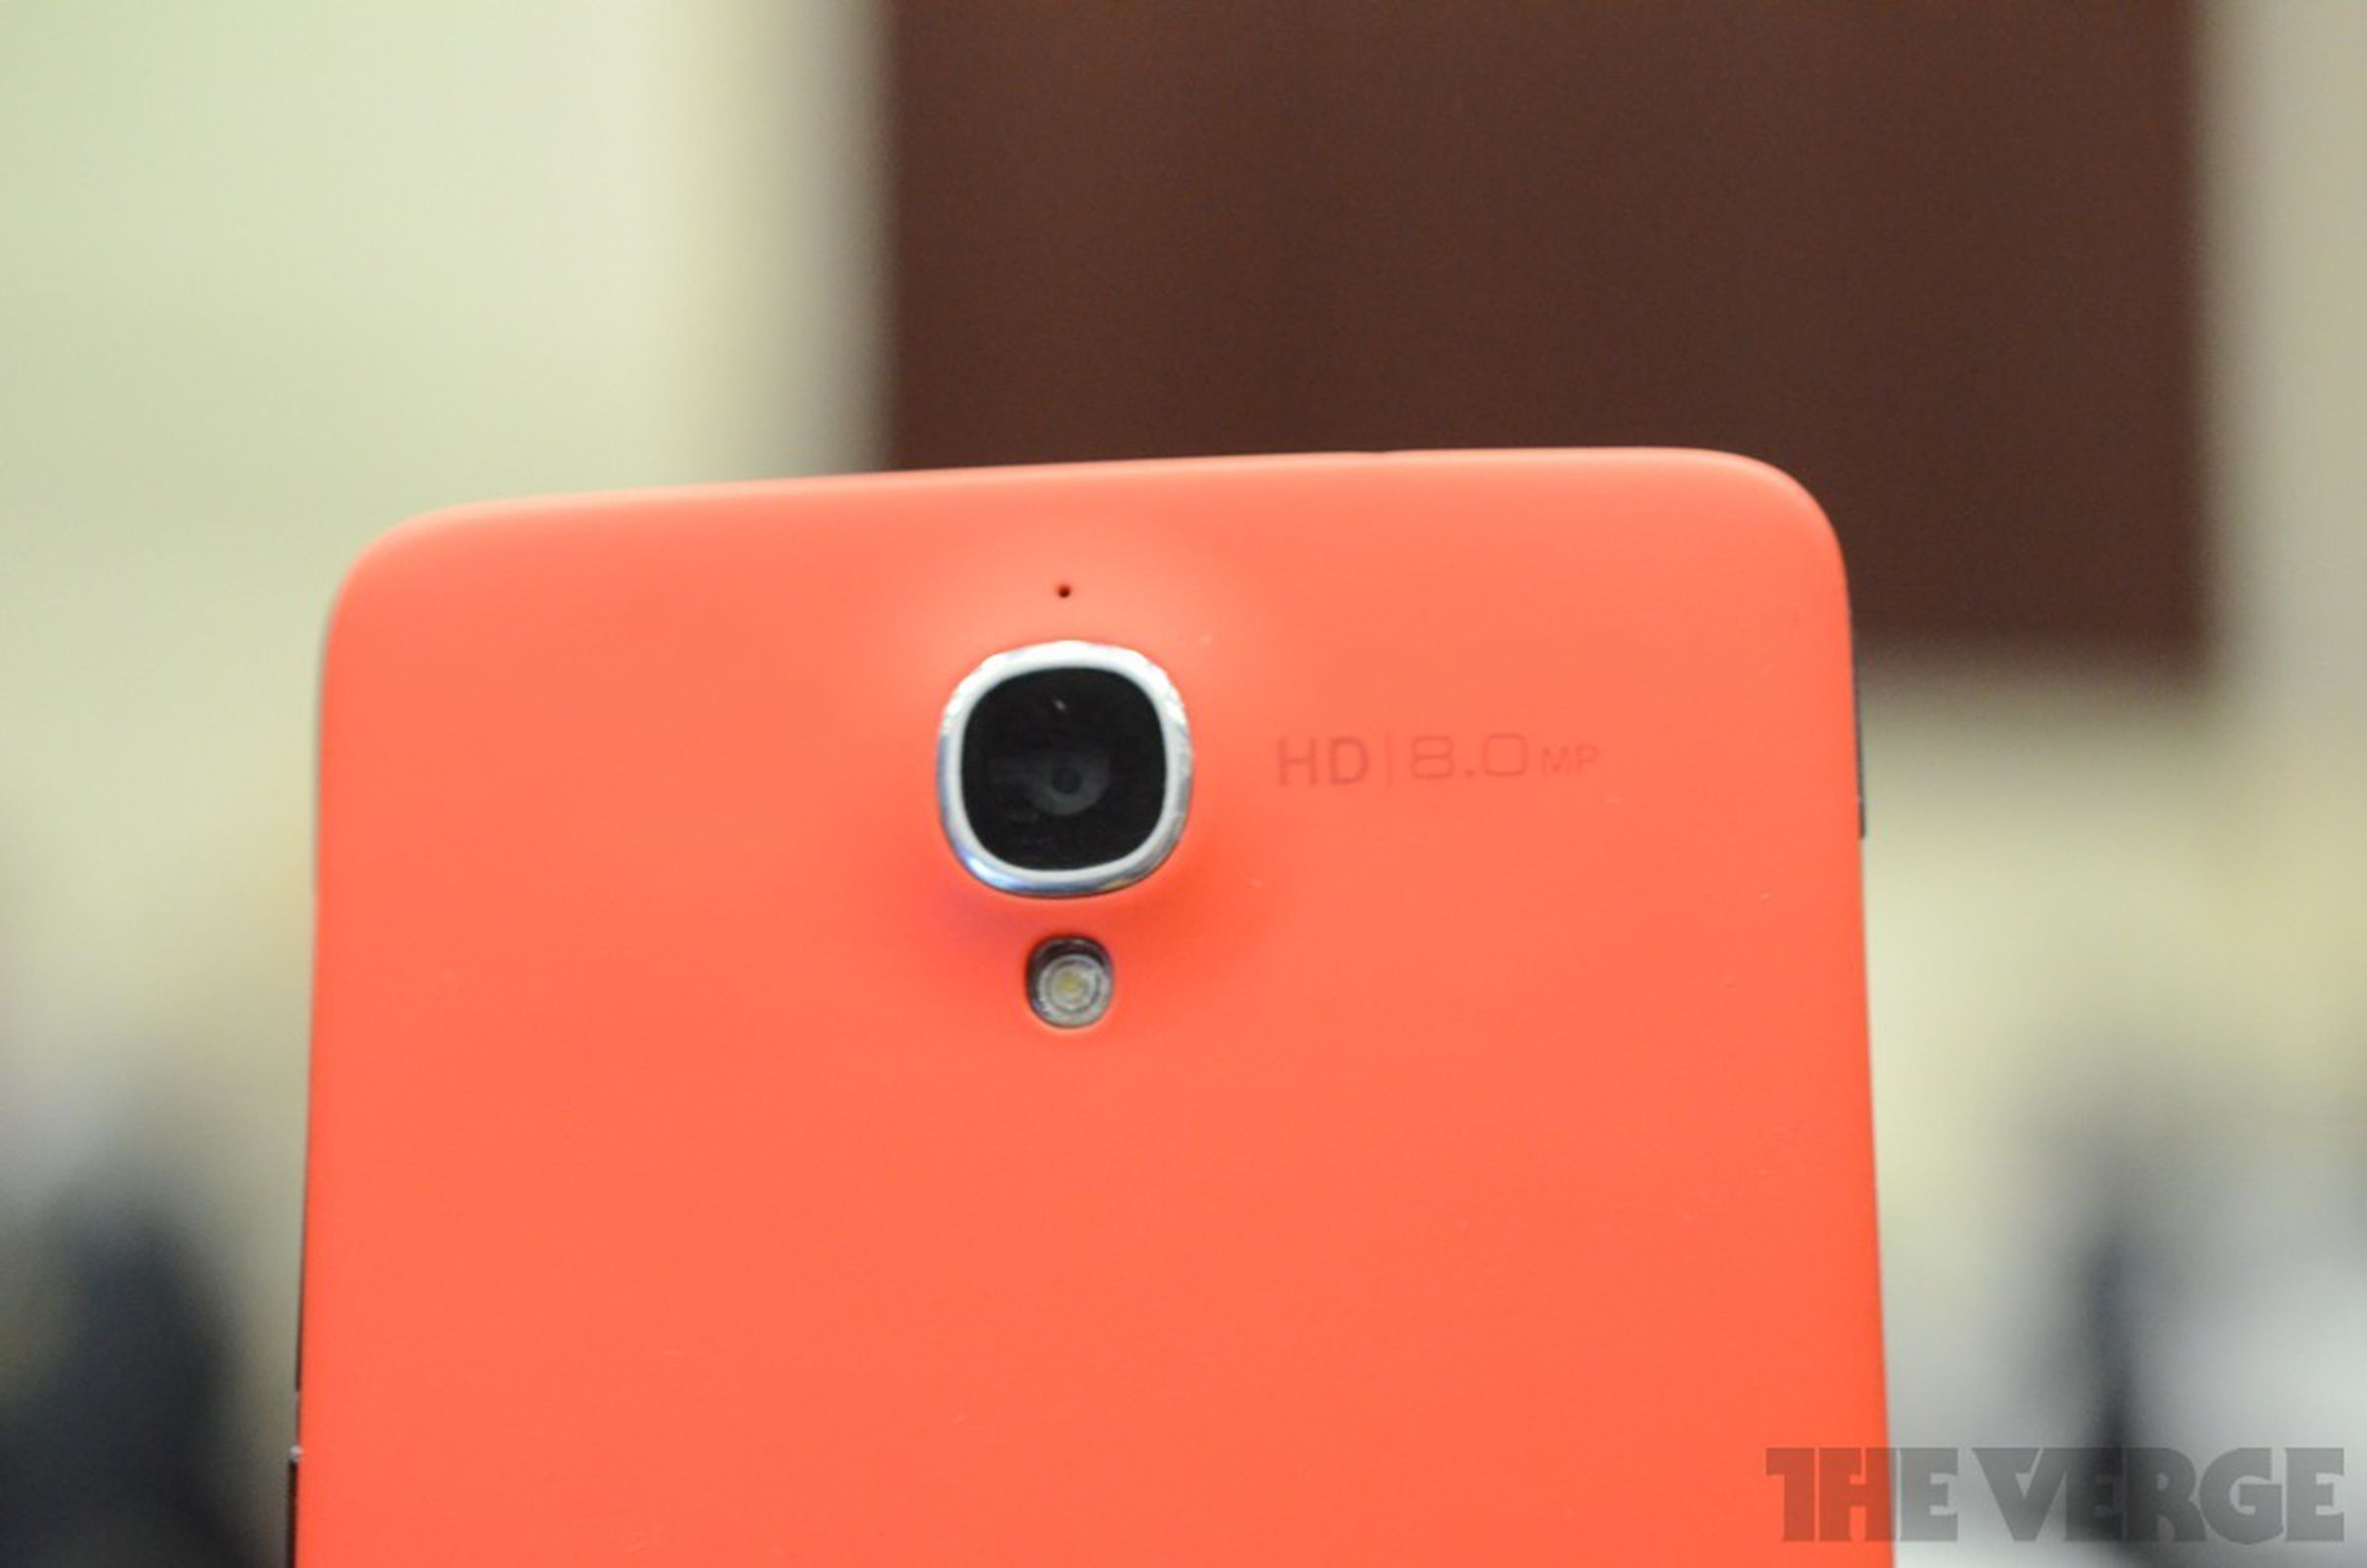 Alcatel One Touch Idol X and One Touch Fire hands-on pictures